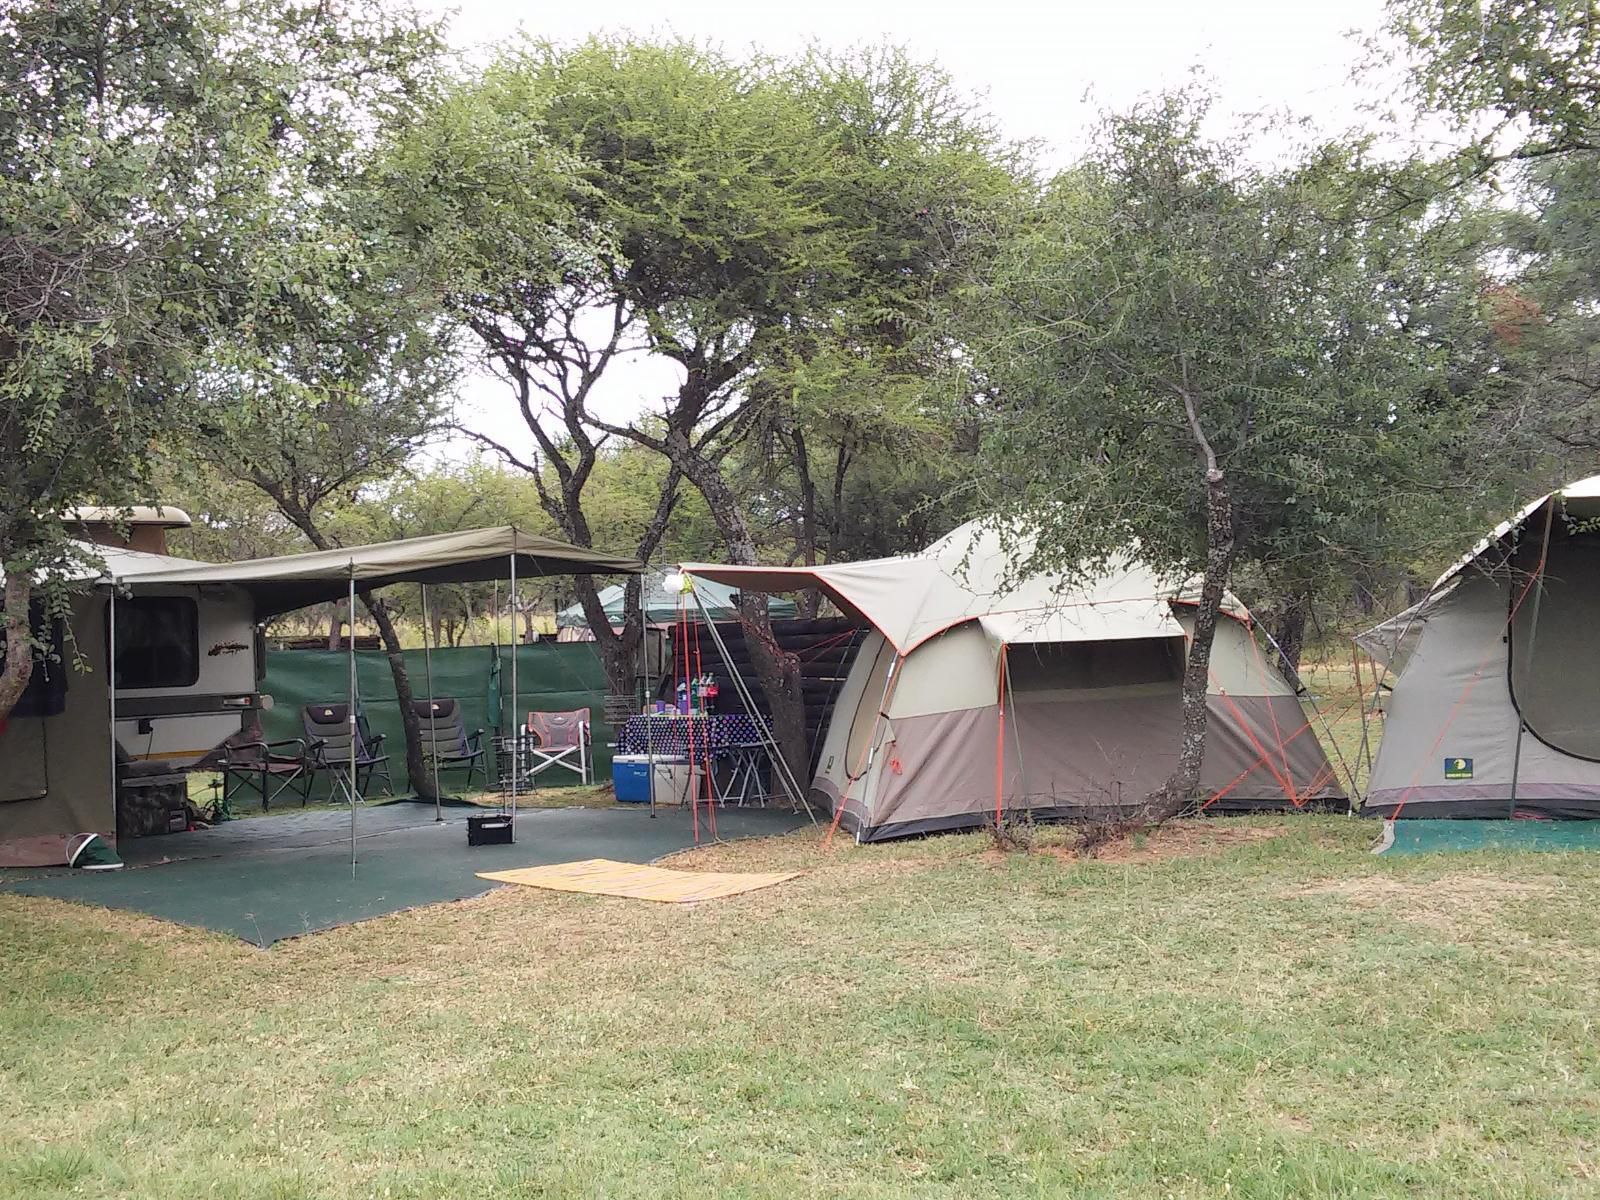 Hanlin Lodge Modimolle Nylstroom Limpopo Province South Africa Tent, Architecture